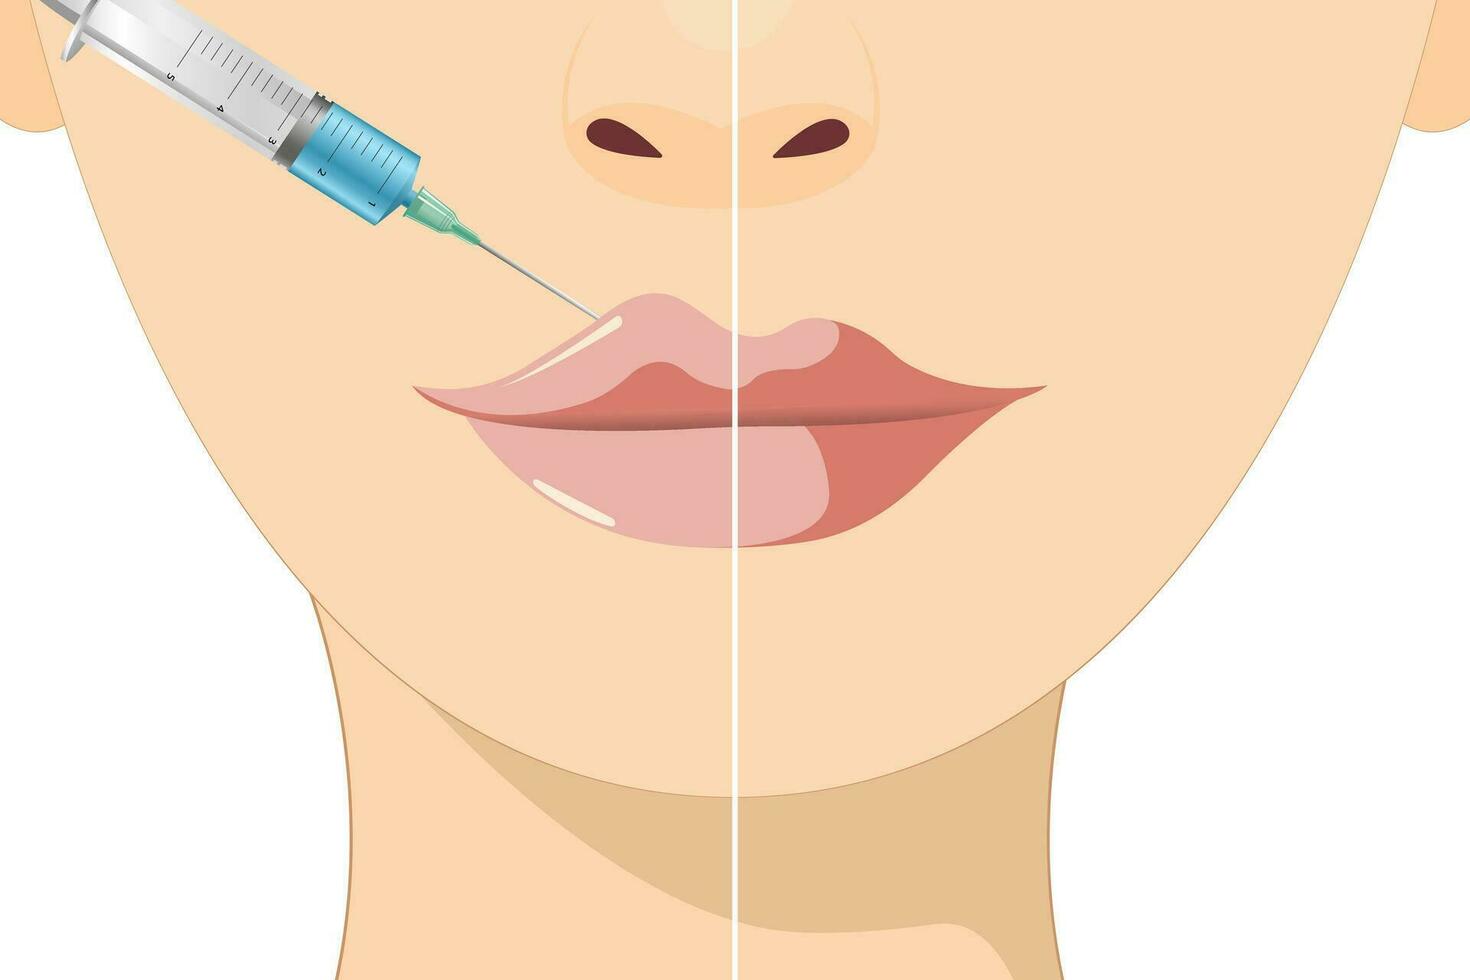 Lip augmentation and correction. Lip filler injections. Hyaluronic acid. Cosmetology procedure in a beauty salon vector